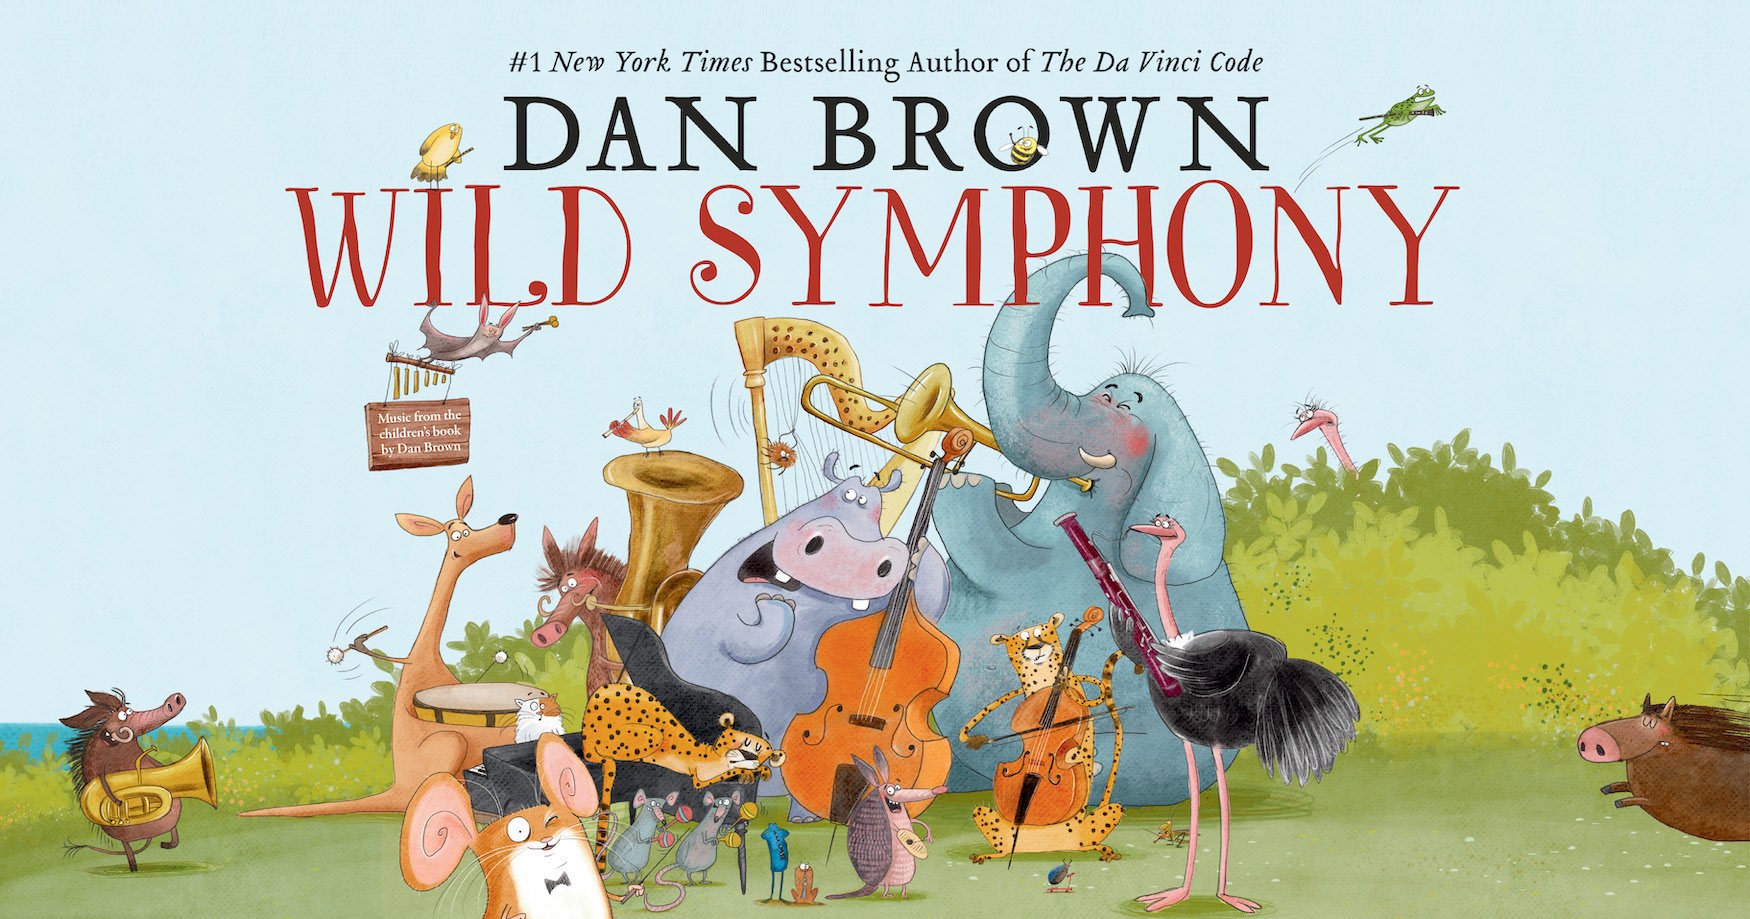 #1 New York Times Bestselling Author of The Da Vinci Code Dan Brown Wild Symphony album cover, a busy illustration of a variety of animals playing classical instruments with playful expressions, in a field with bushes, near water, and a blue sky.